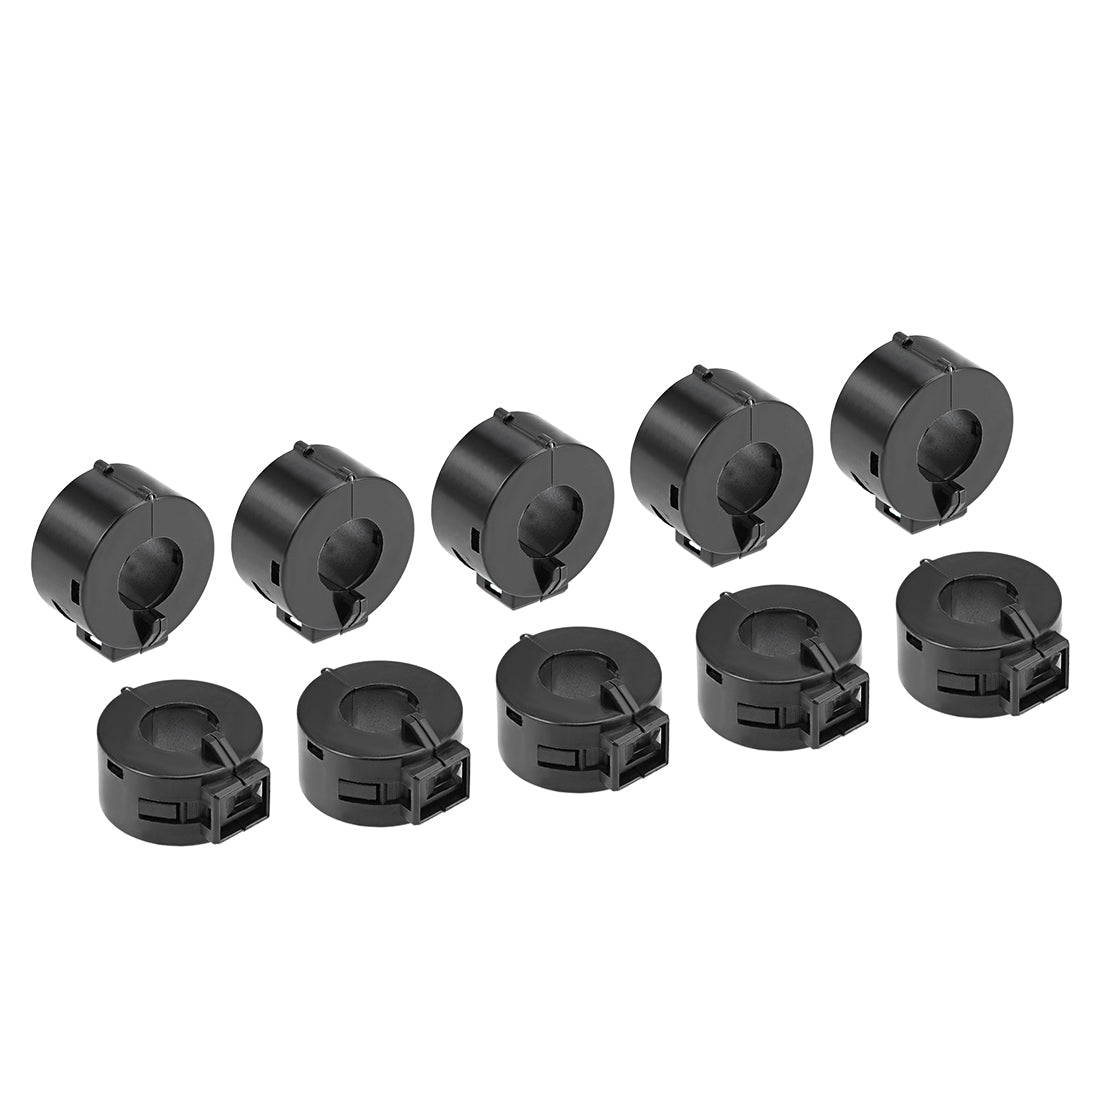 uxcell Uxcell 15mm Ferrite Cores Ring Clip-On RFI EMI Noise Suppression Filter Cable Clip, Black 10pcs